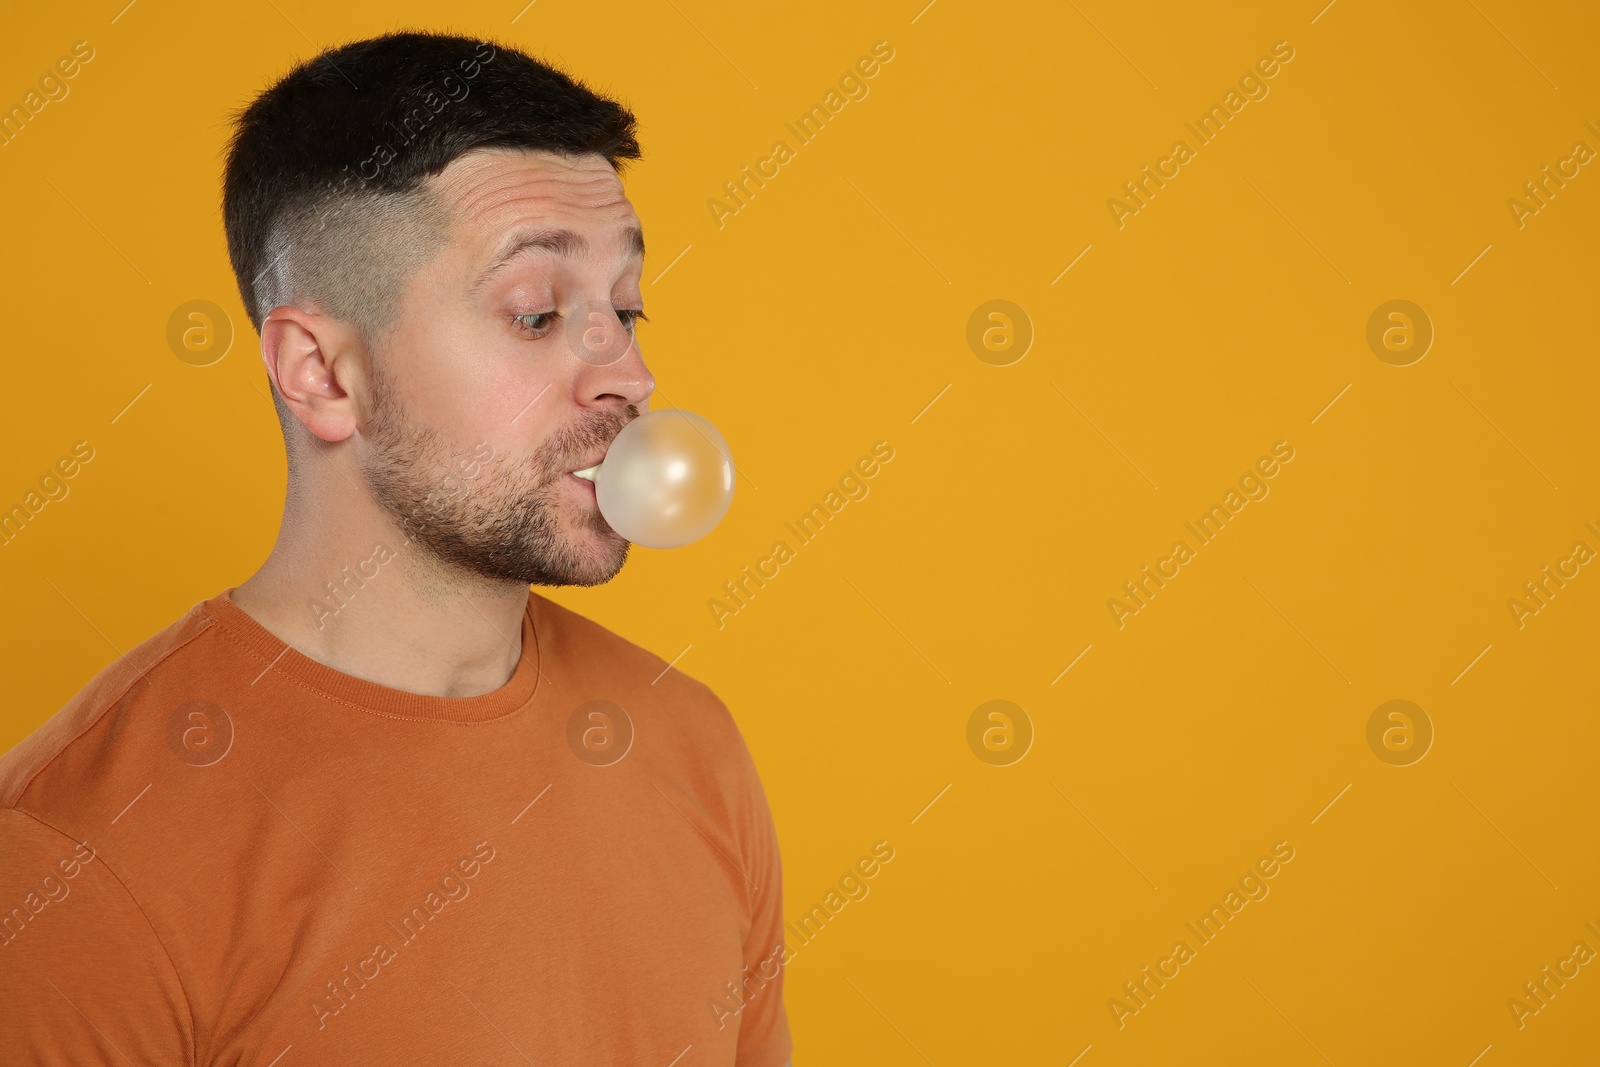 Photo of Surprised man blowing bubble gum on orange background, space for text